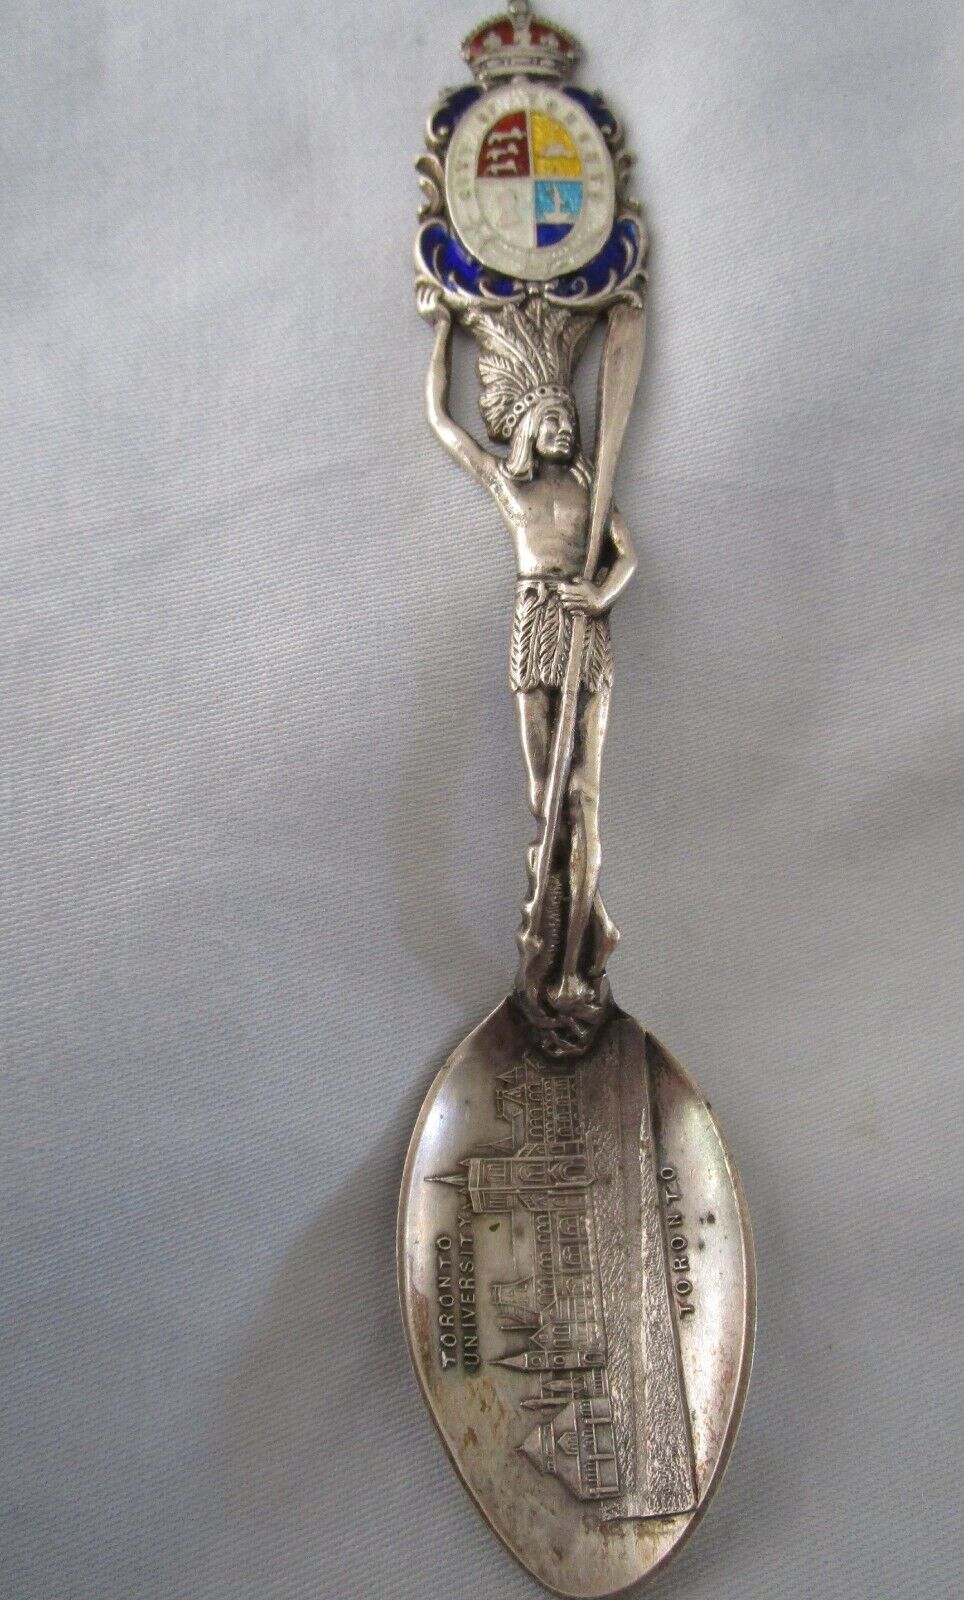 ANTIQUE SOUVENIR STERLING SILVER AND ENAMEL SPOON FROM TORONTO CANADA